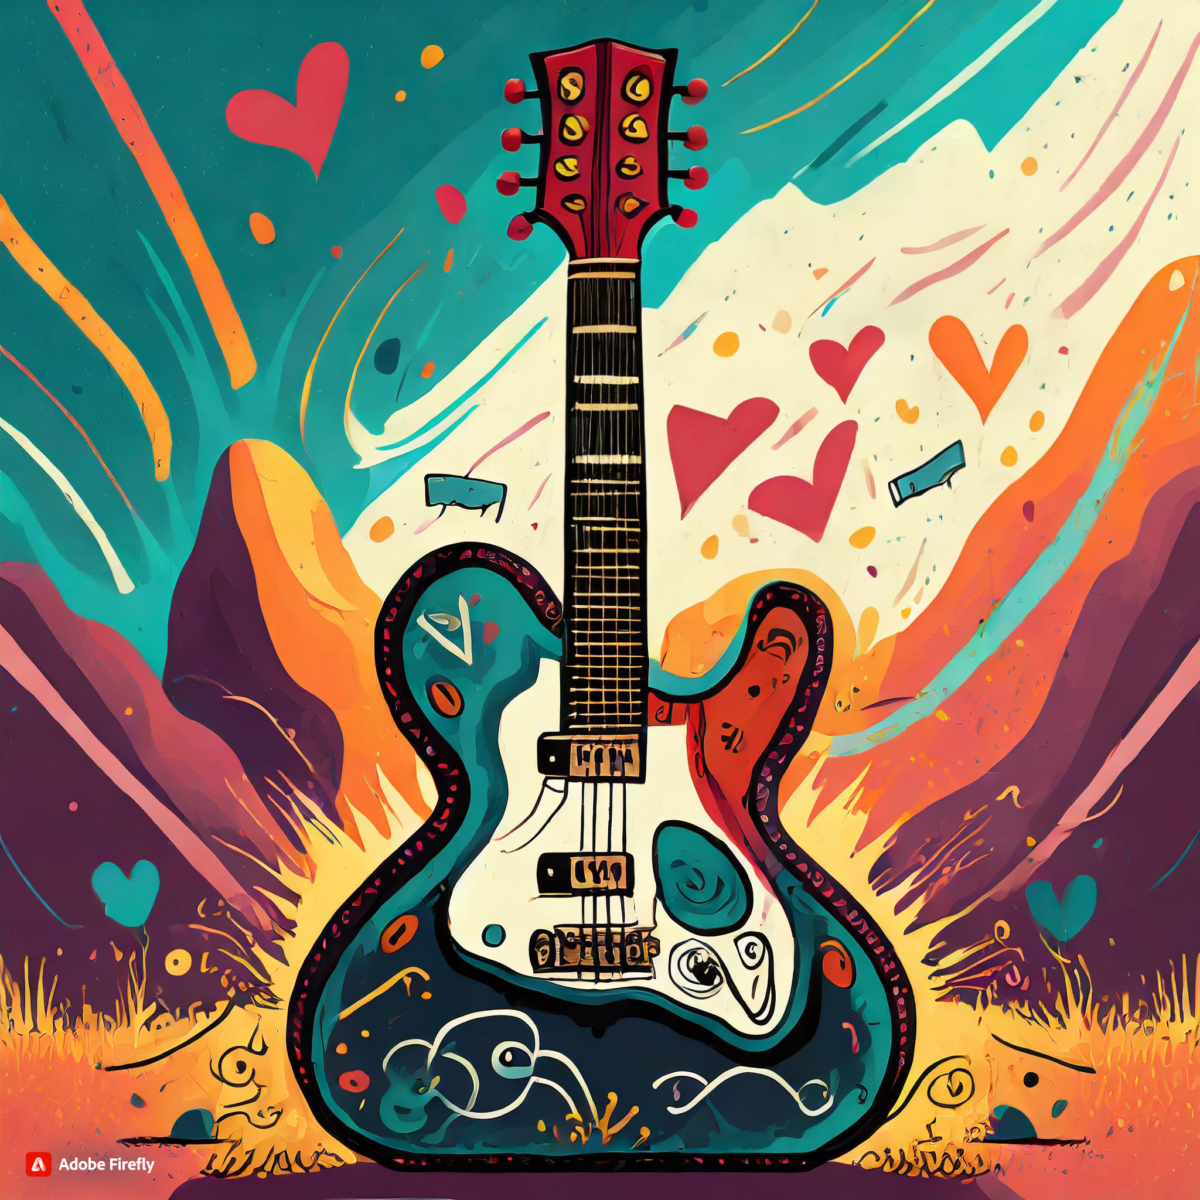 A stylized guitar in front of a stylized, artistic, vibrant landscape.